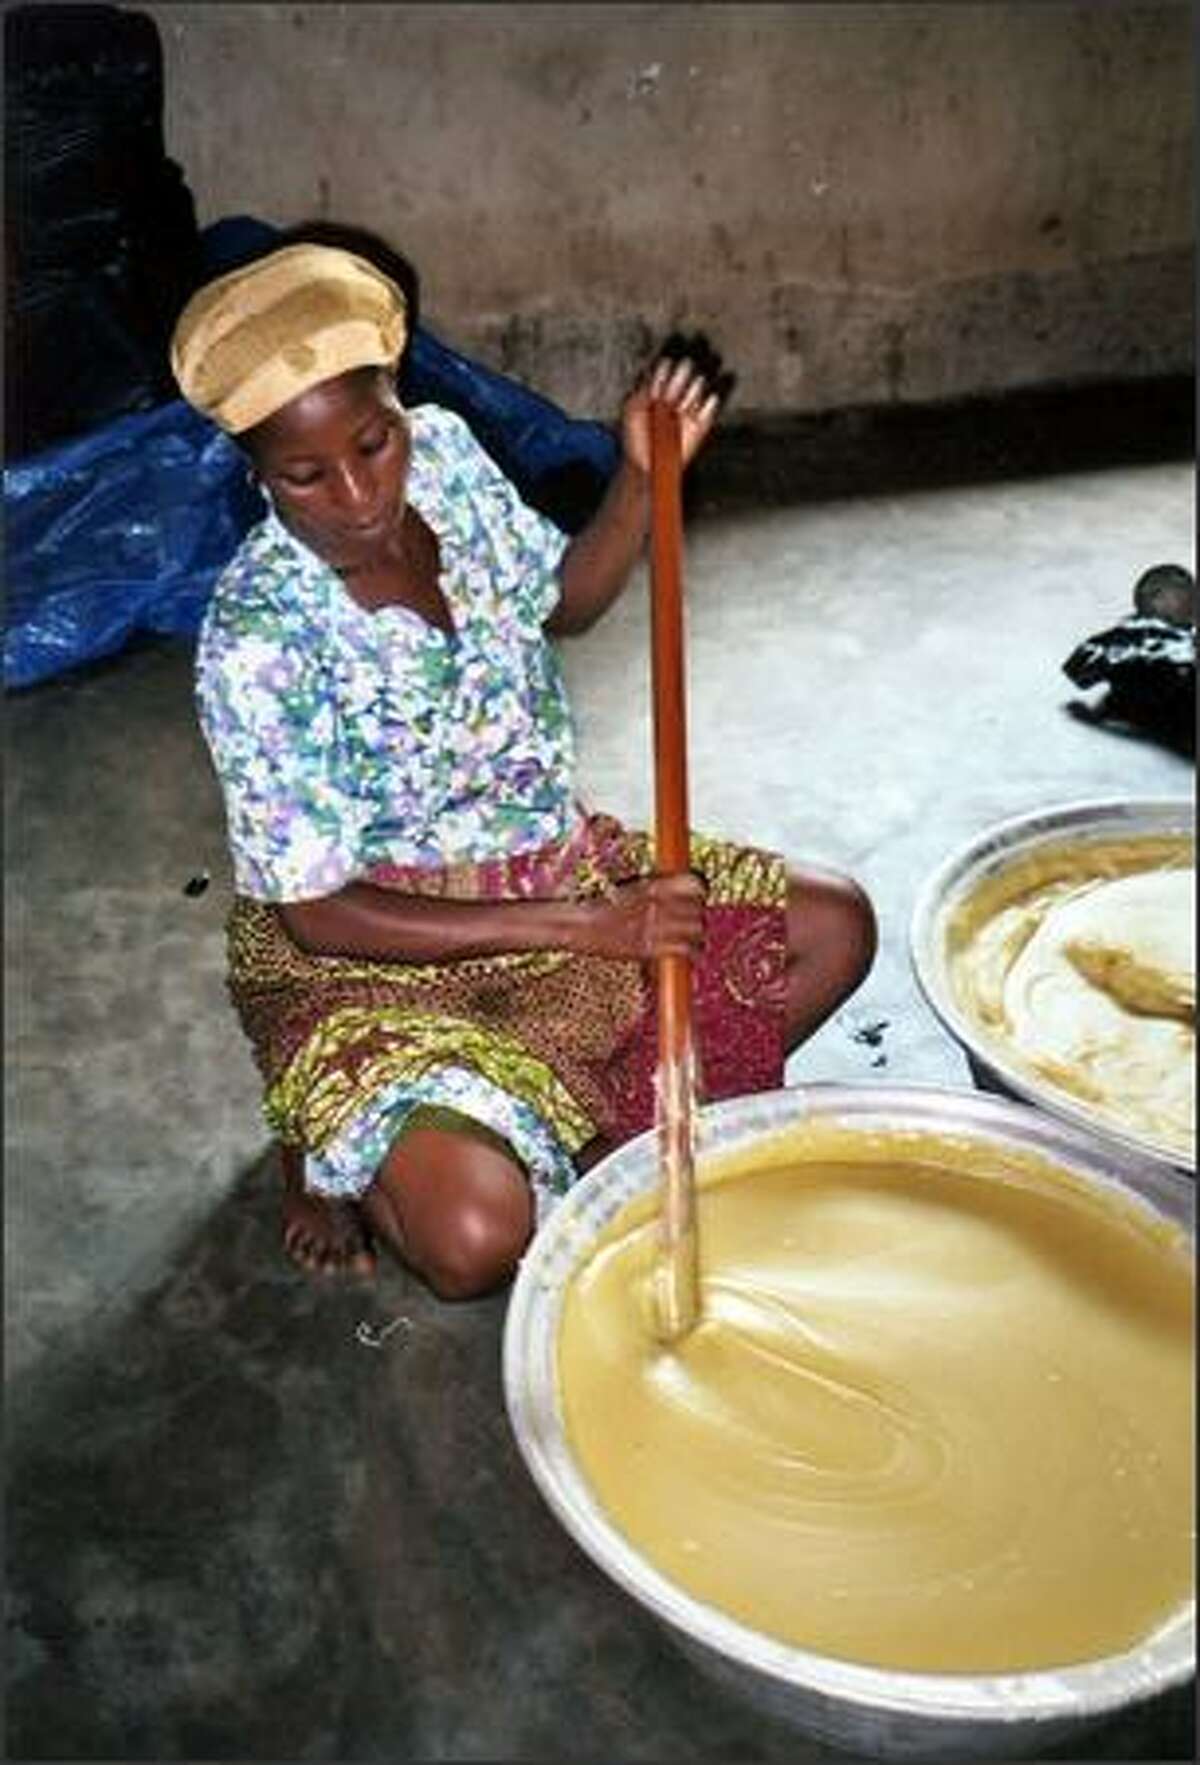 A worker at Alaffia's co-op in Togo stirs the cooked, whipped shea butter during the final stage of a 12-step process.